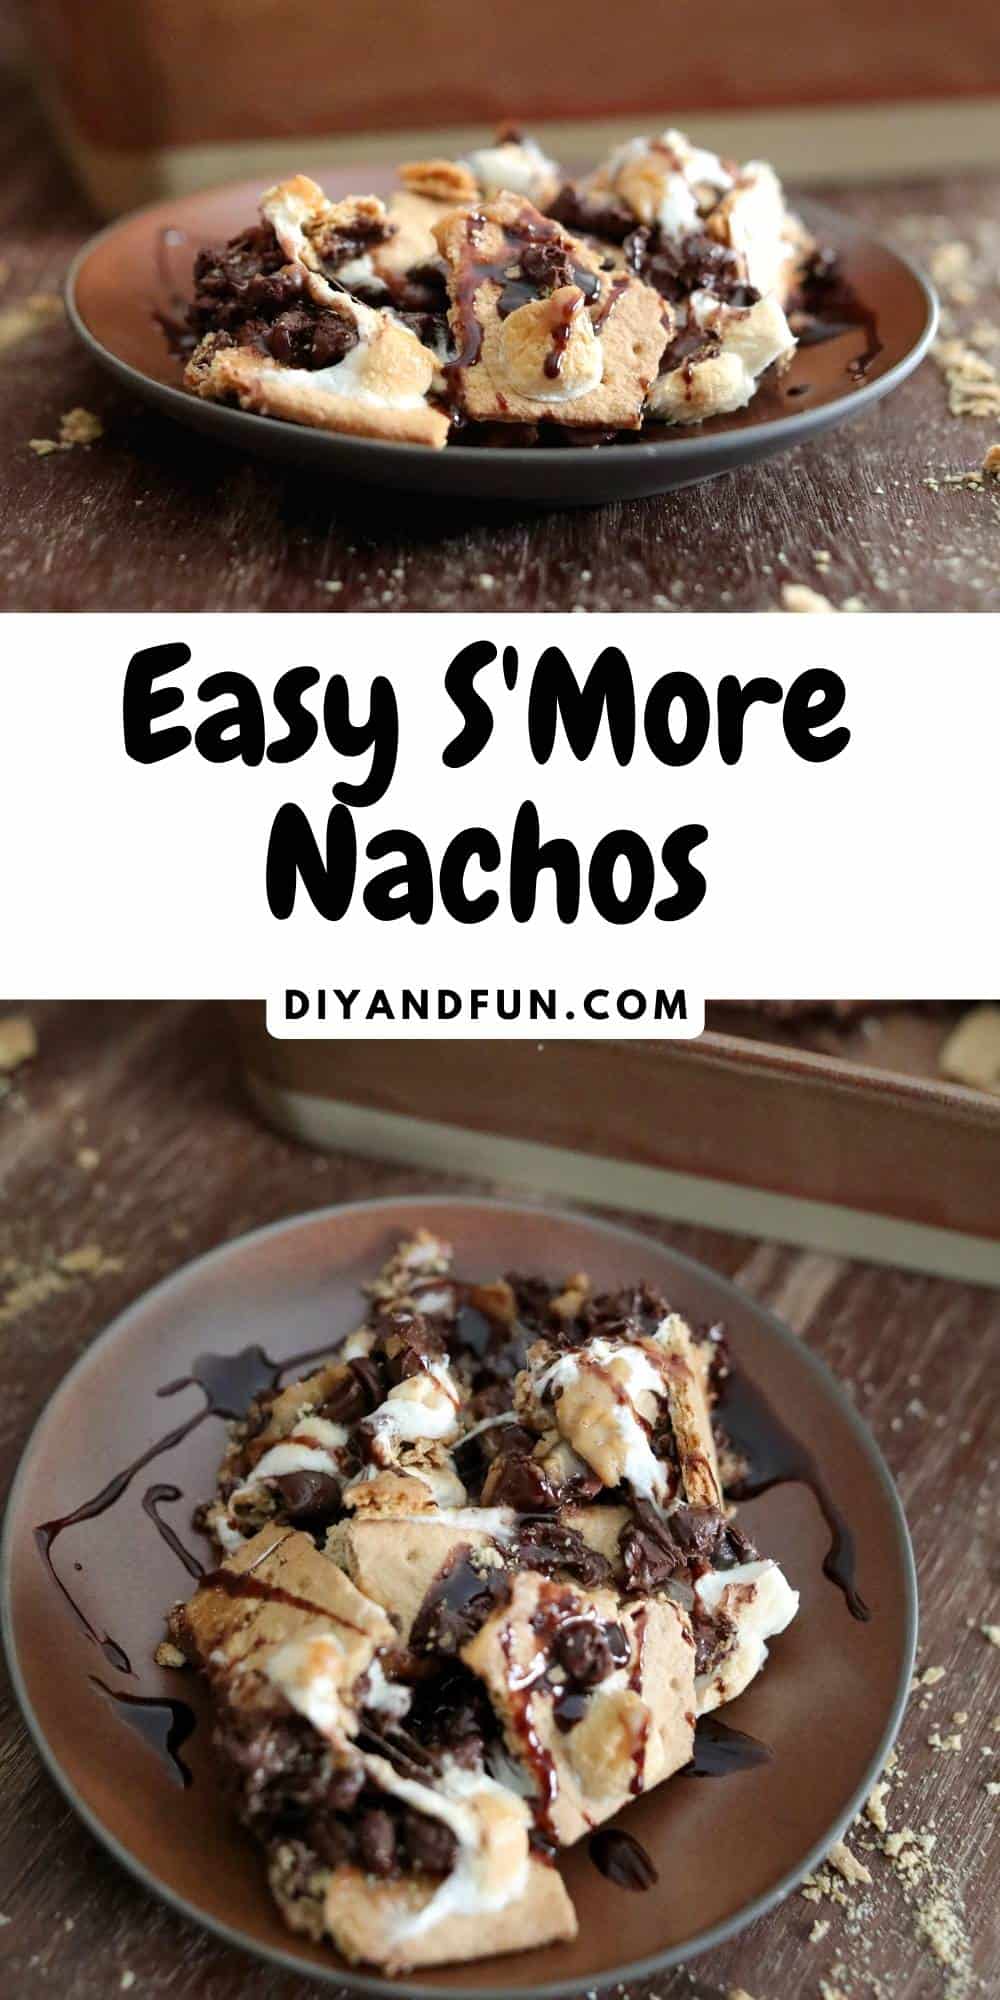 Easy Smores Nachos, a simple recipe for making a favorite S'Mores dessert or snack in the oven or on the grill.